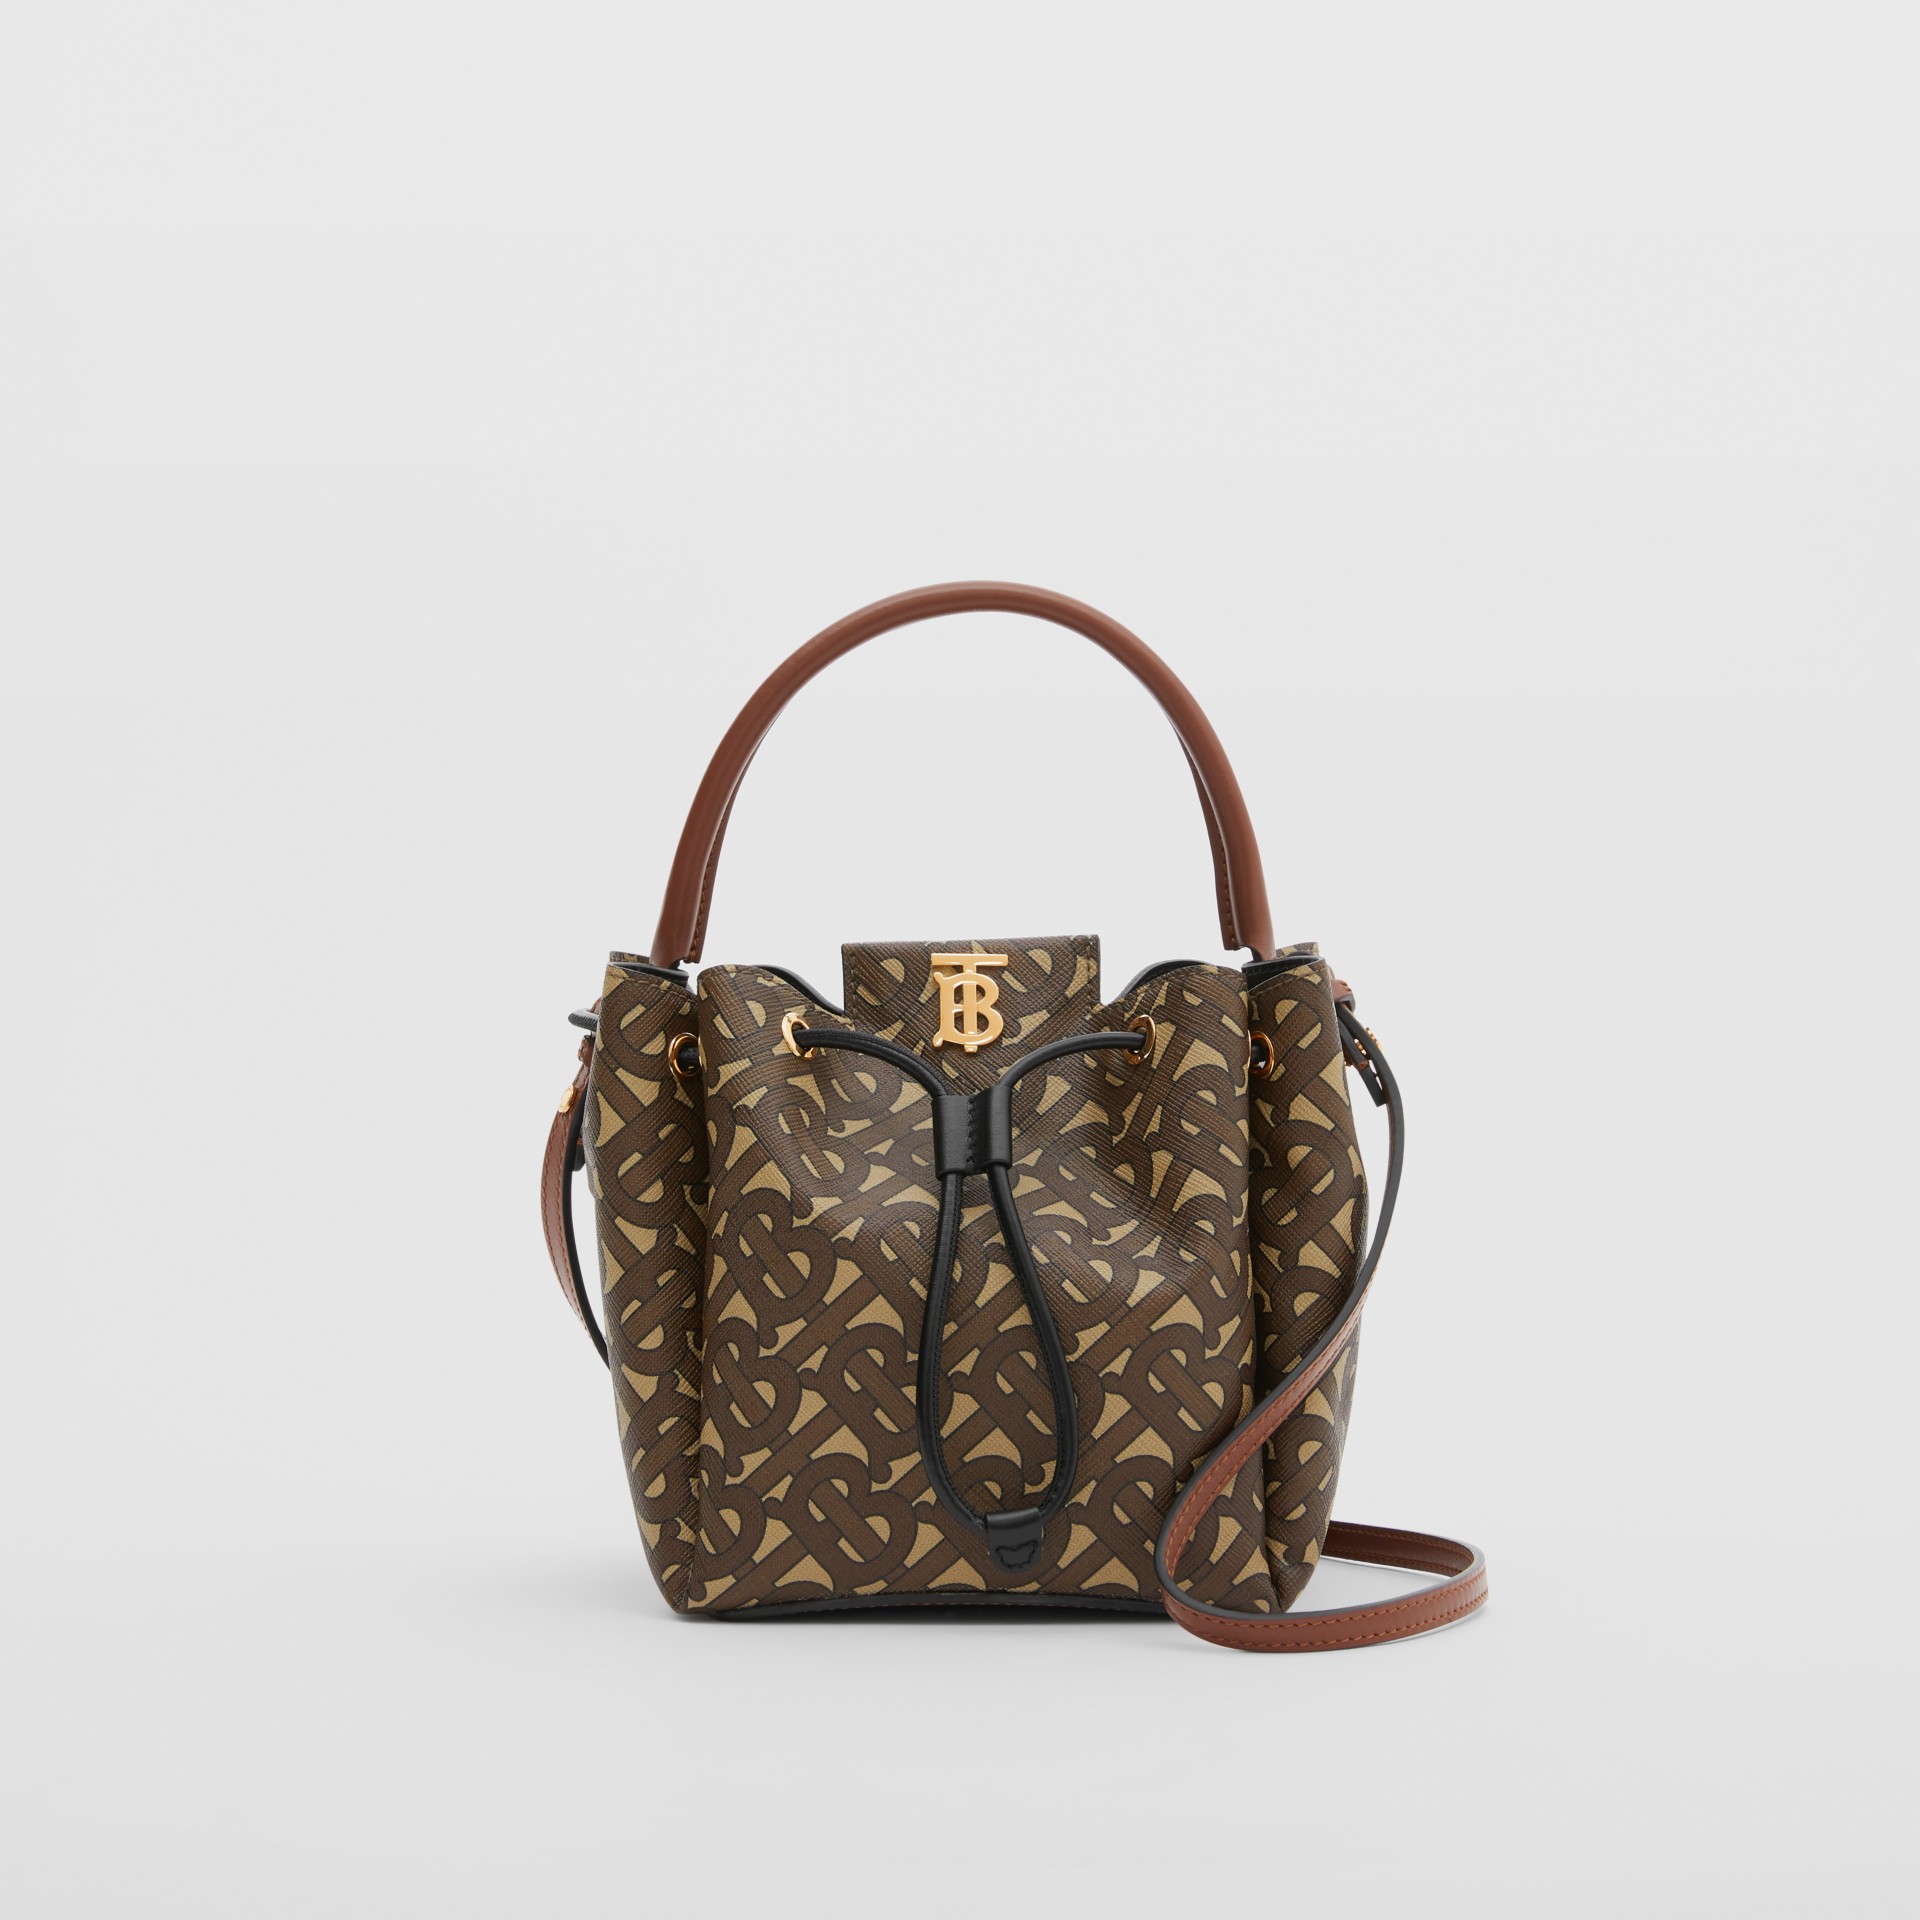 Monogram E-canvas Bucket Bag in Bridle Brown - Women | Burberry United States